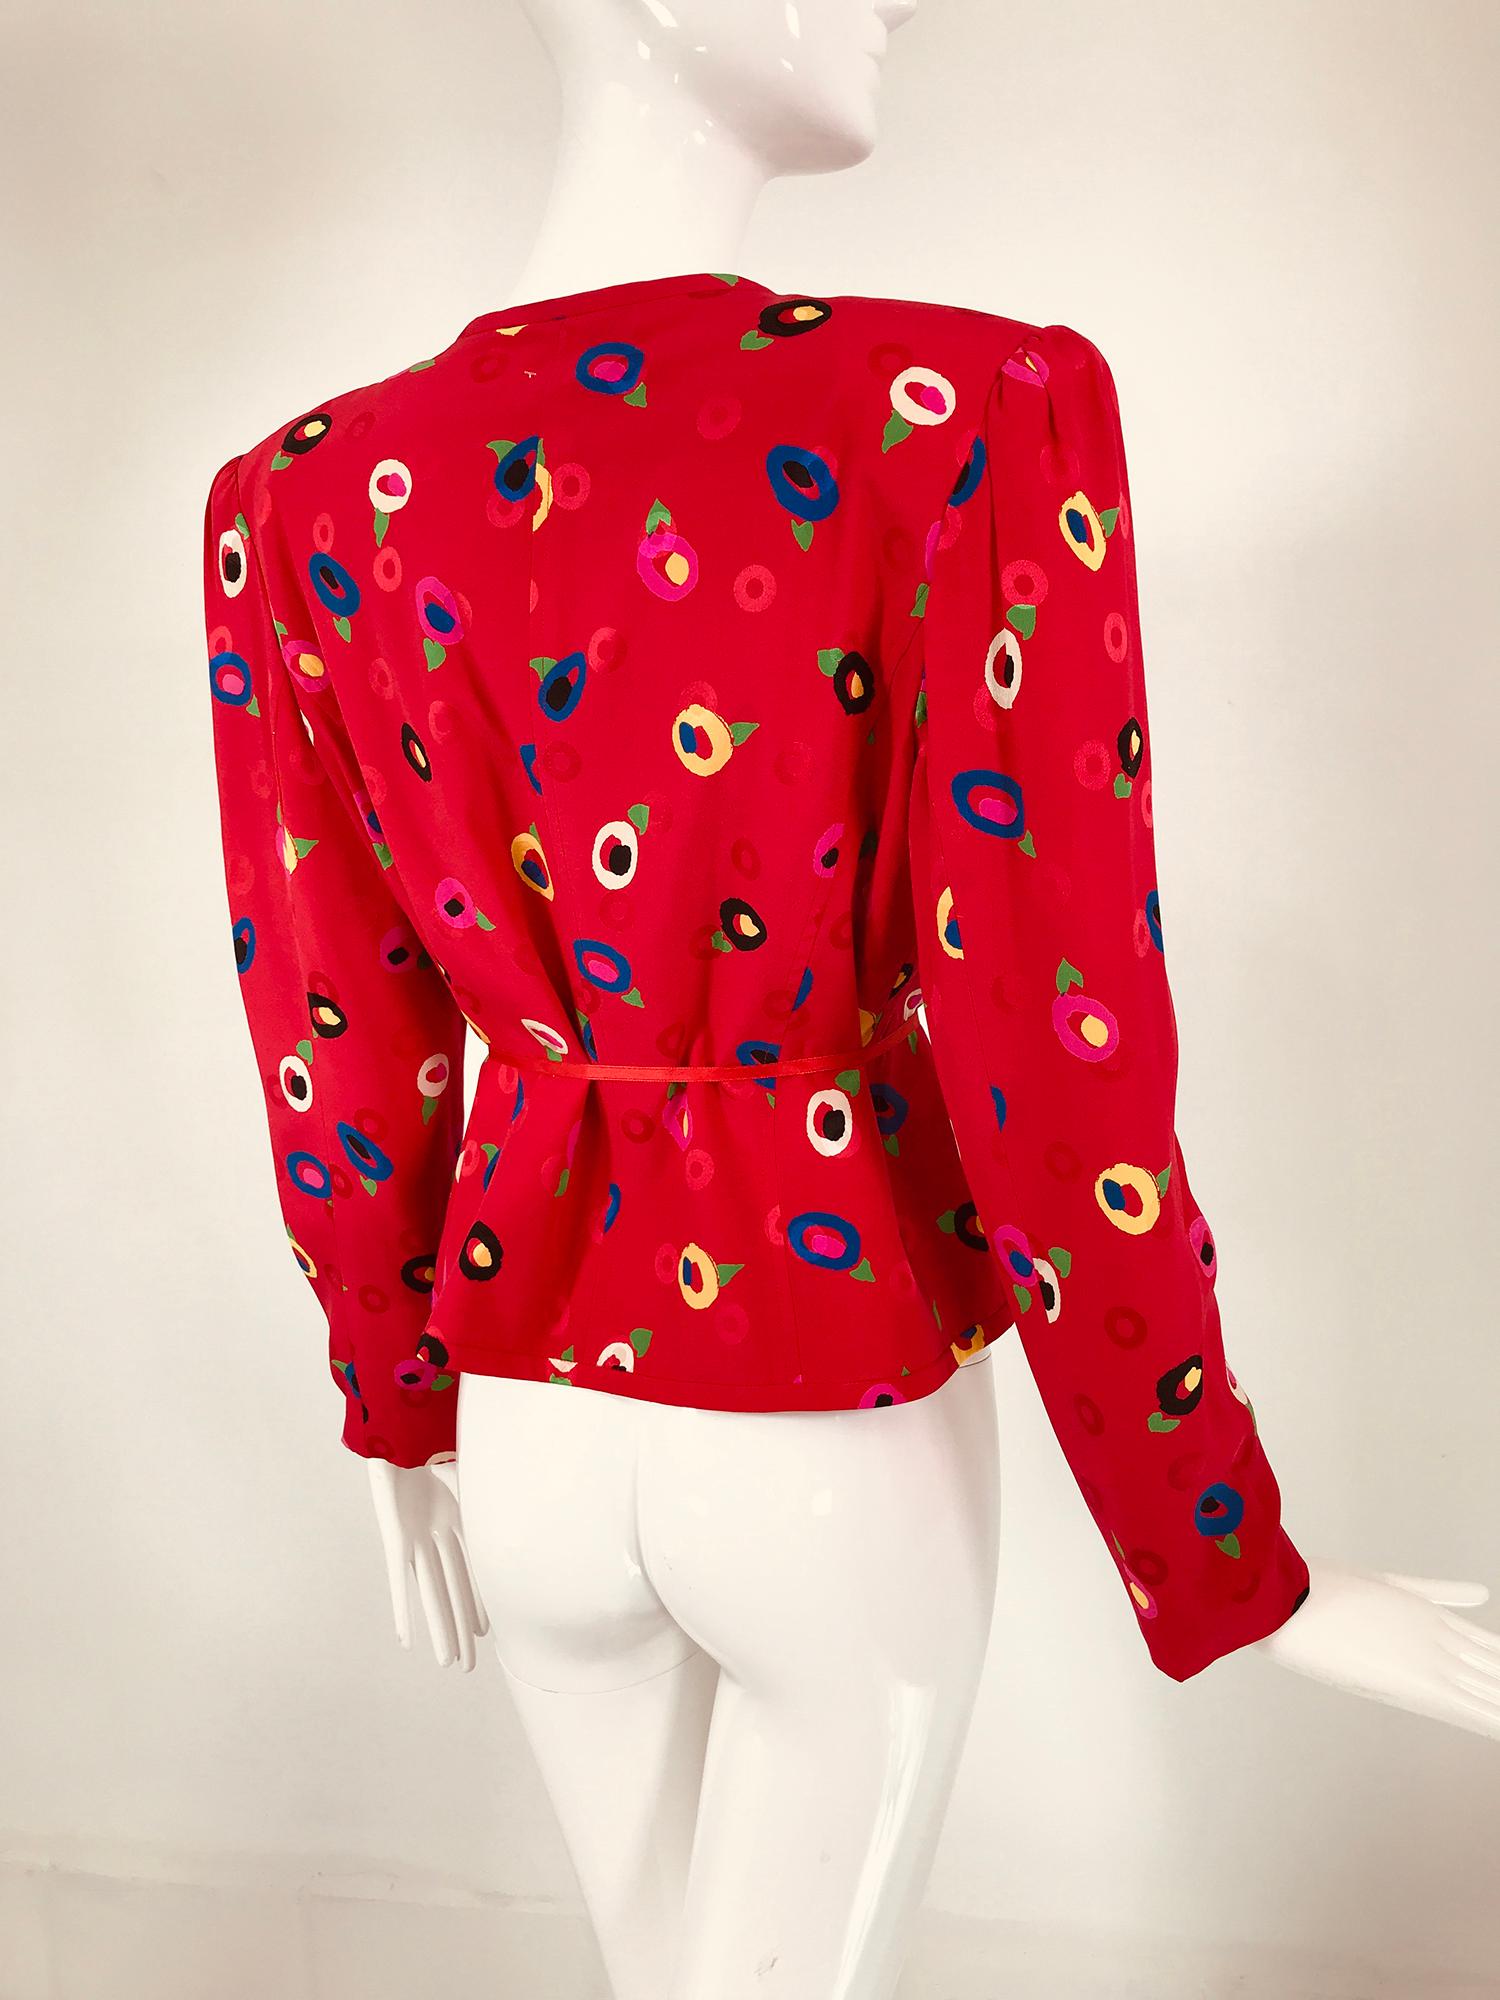 Ungaro Red Printed Silk Jacquard V Neck Button Front Jacket 1980s For Sale 4